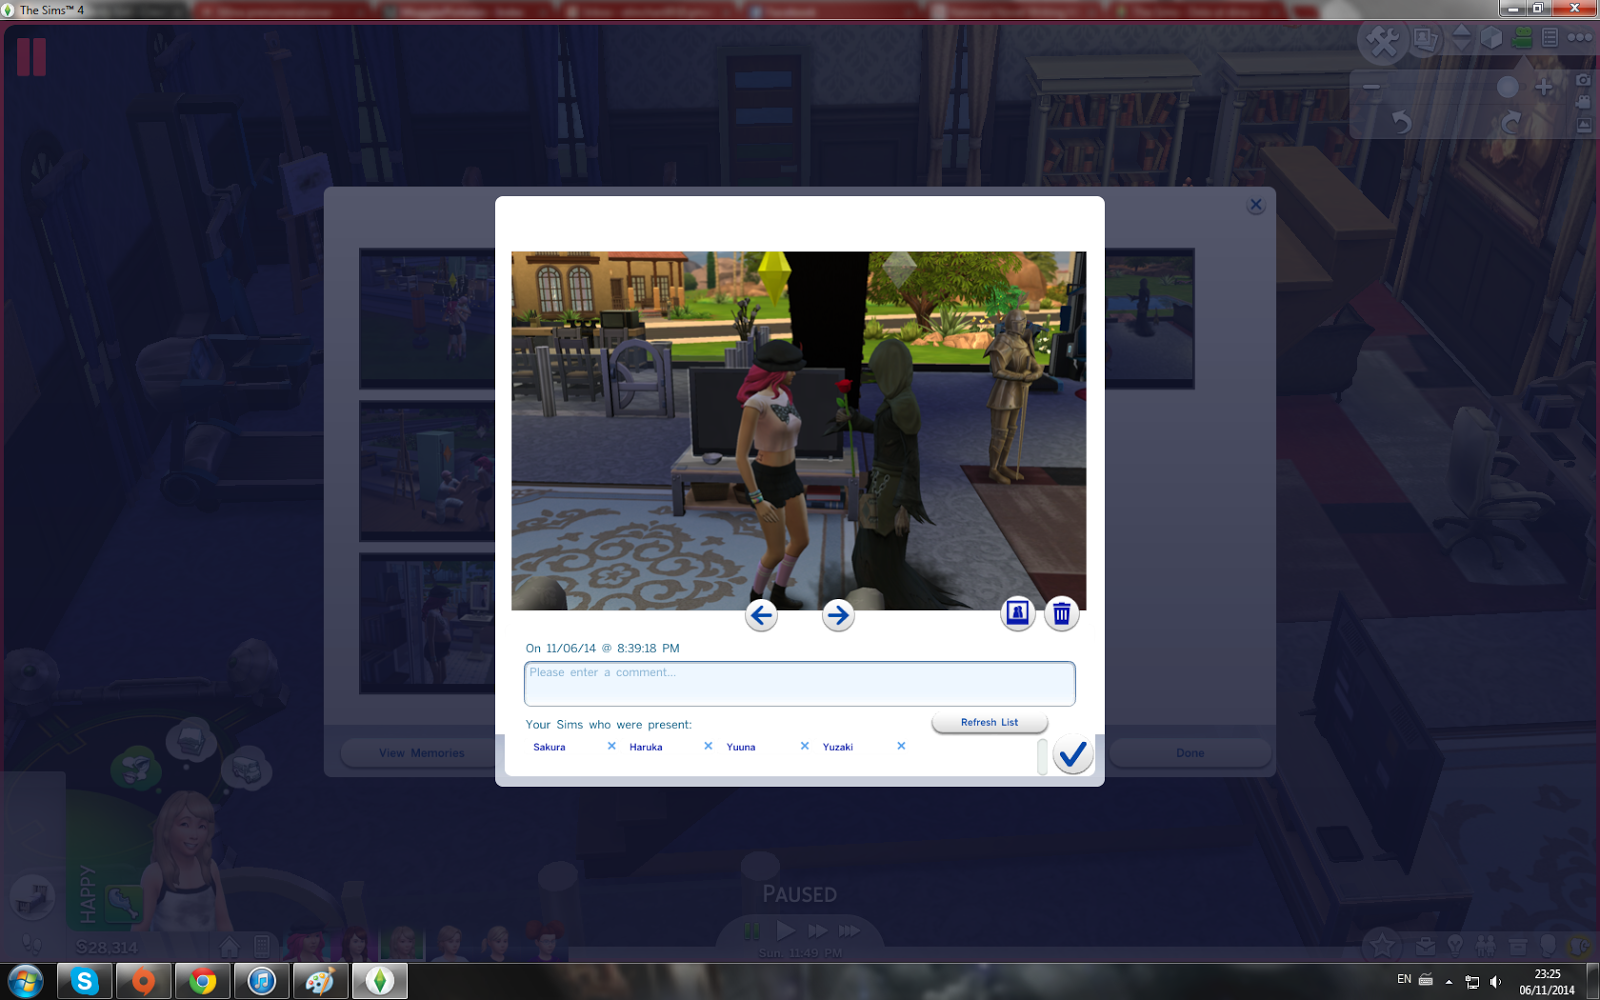 How To Romance The Grim Reaper in The Sims 4